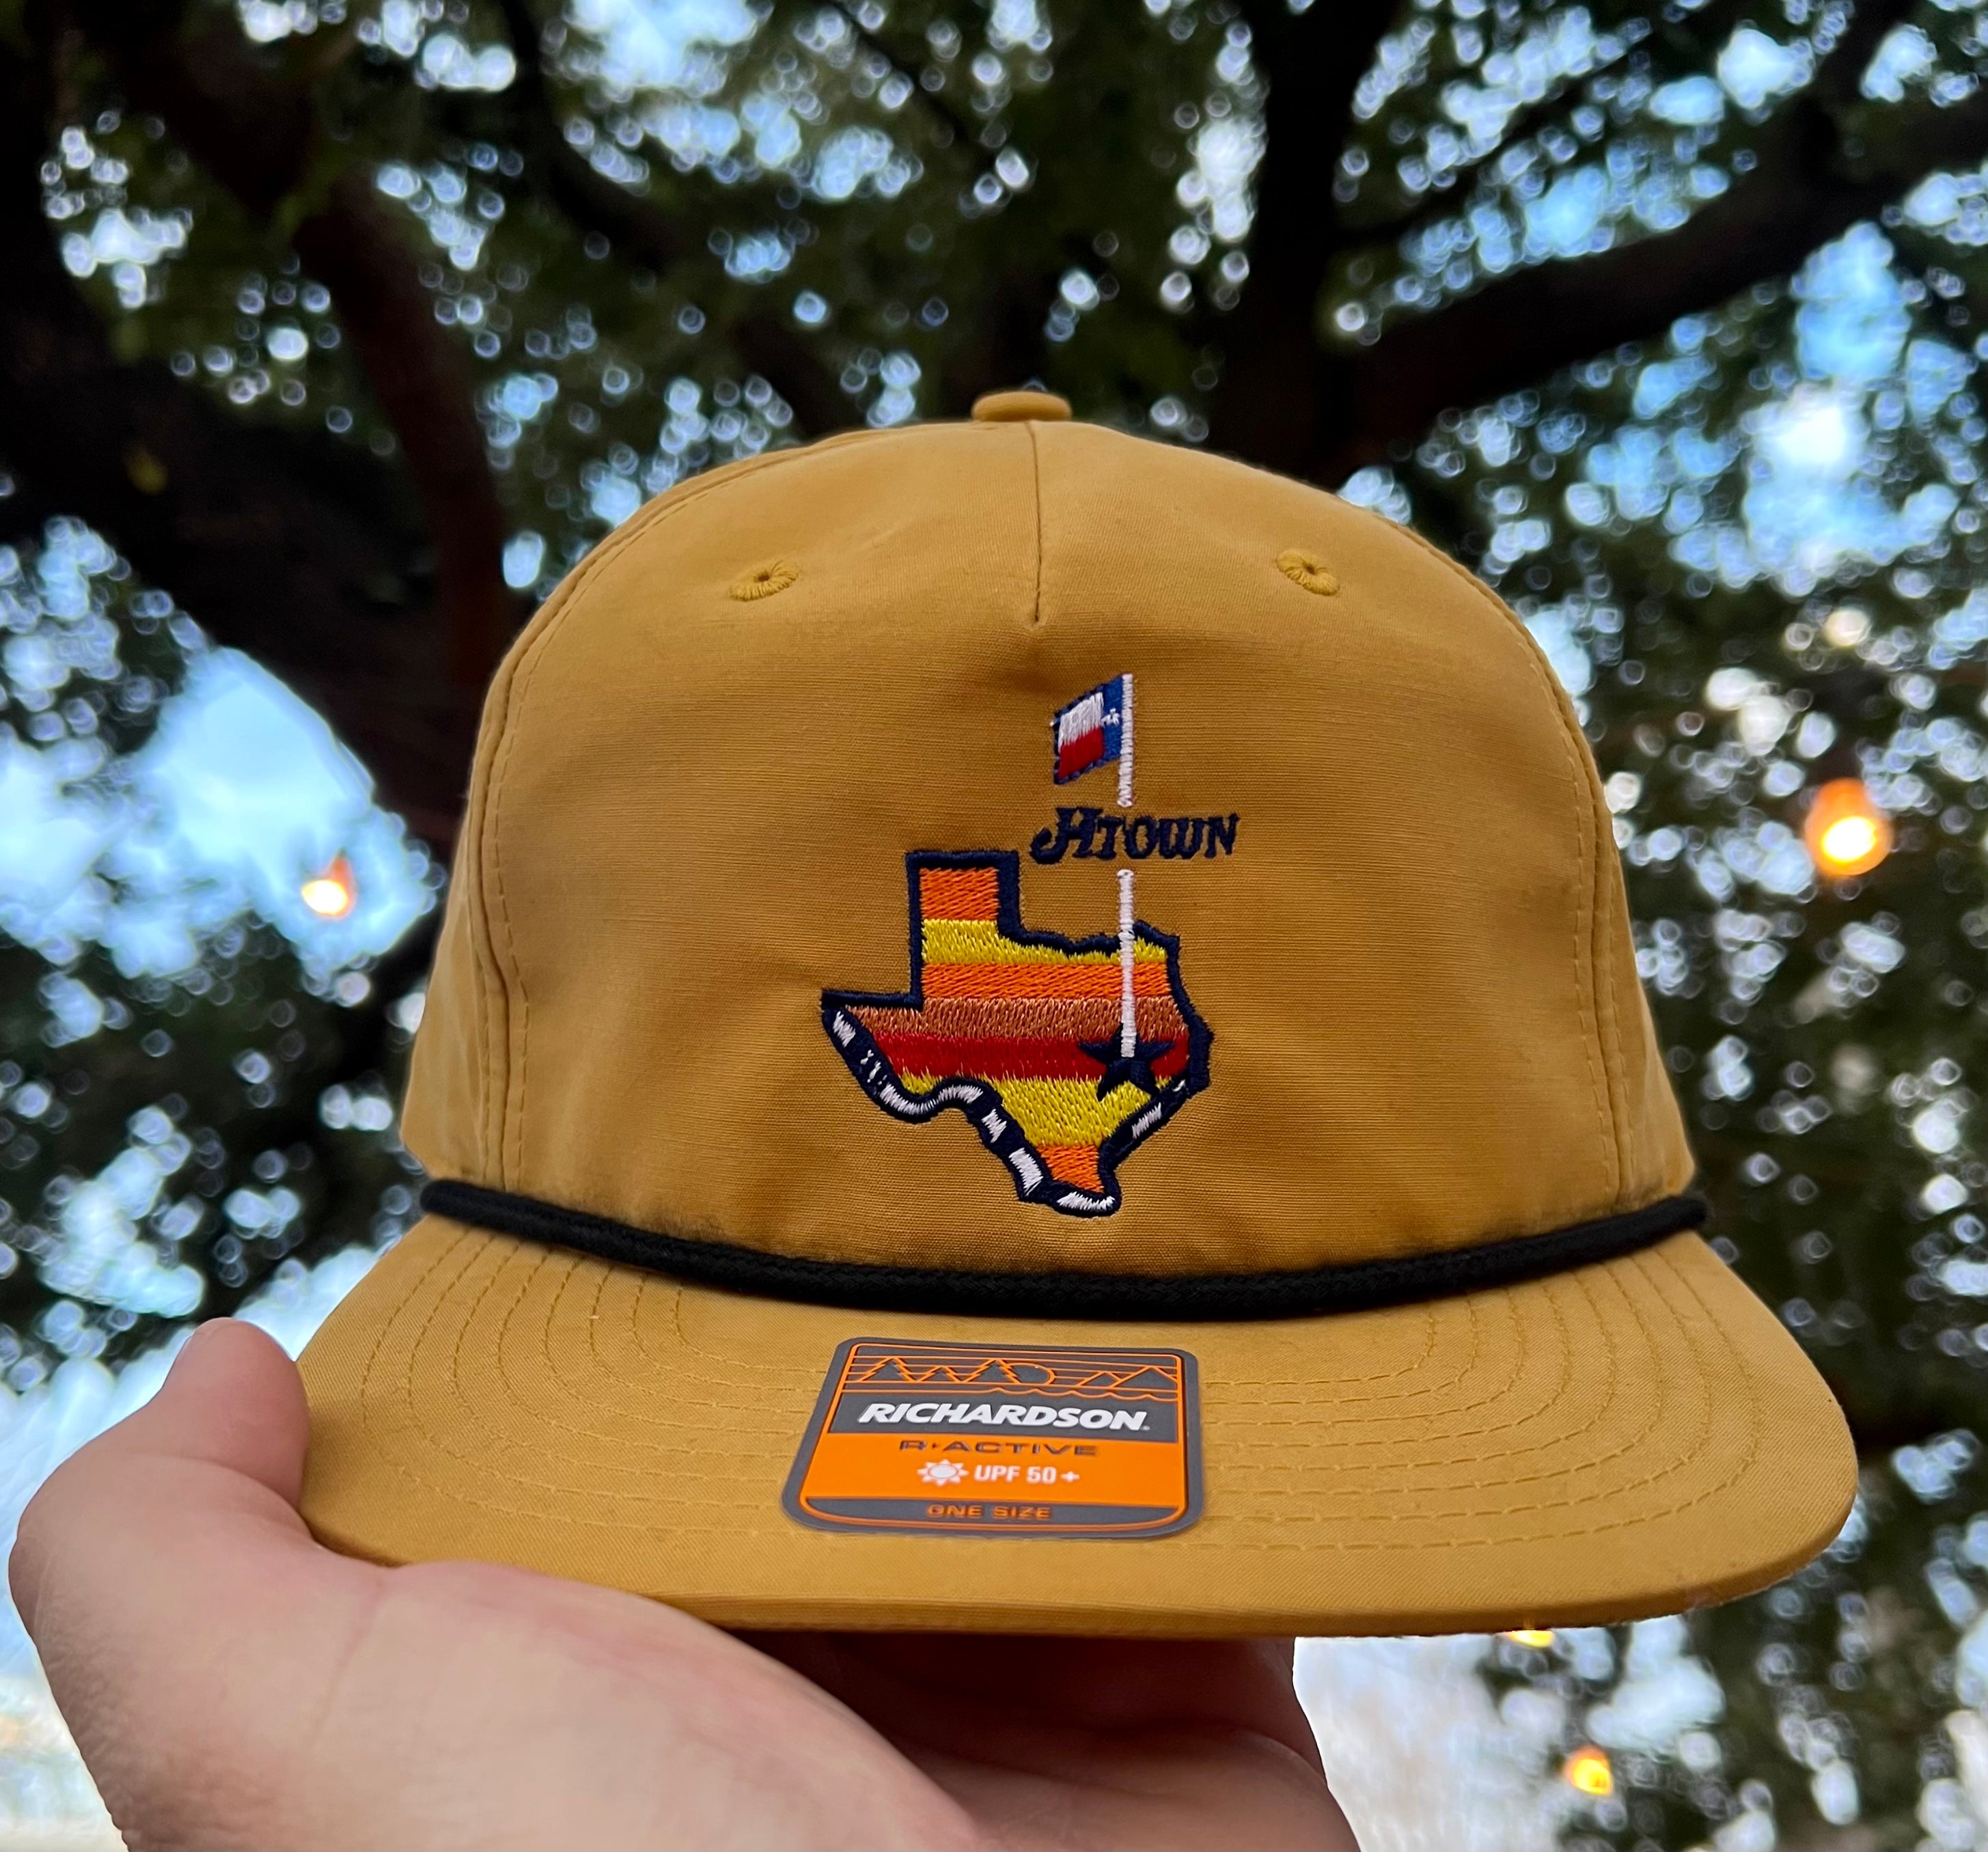 astros new space city hat